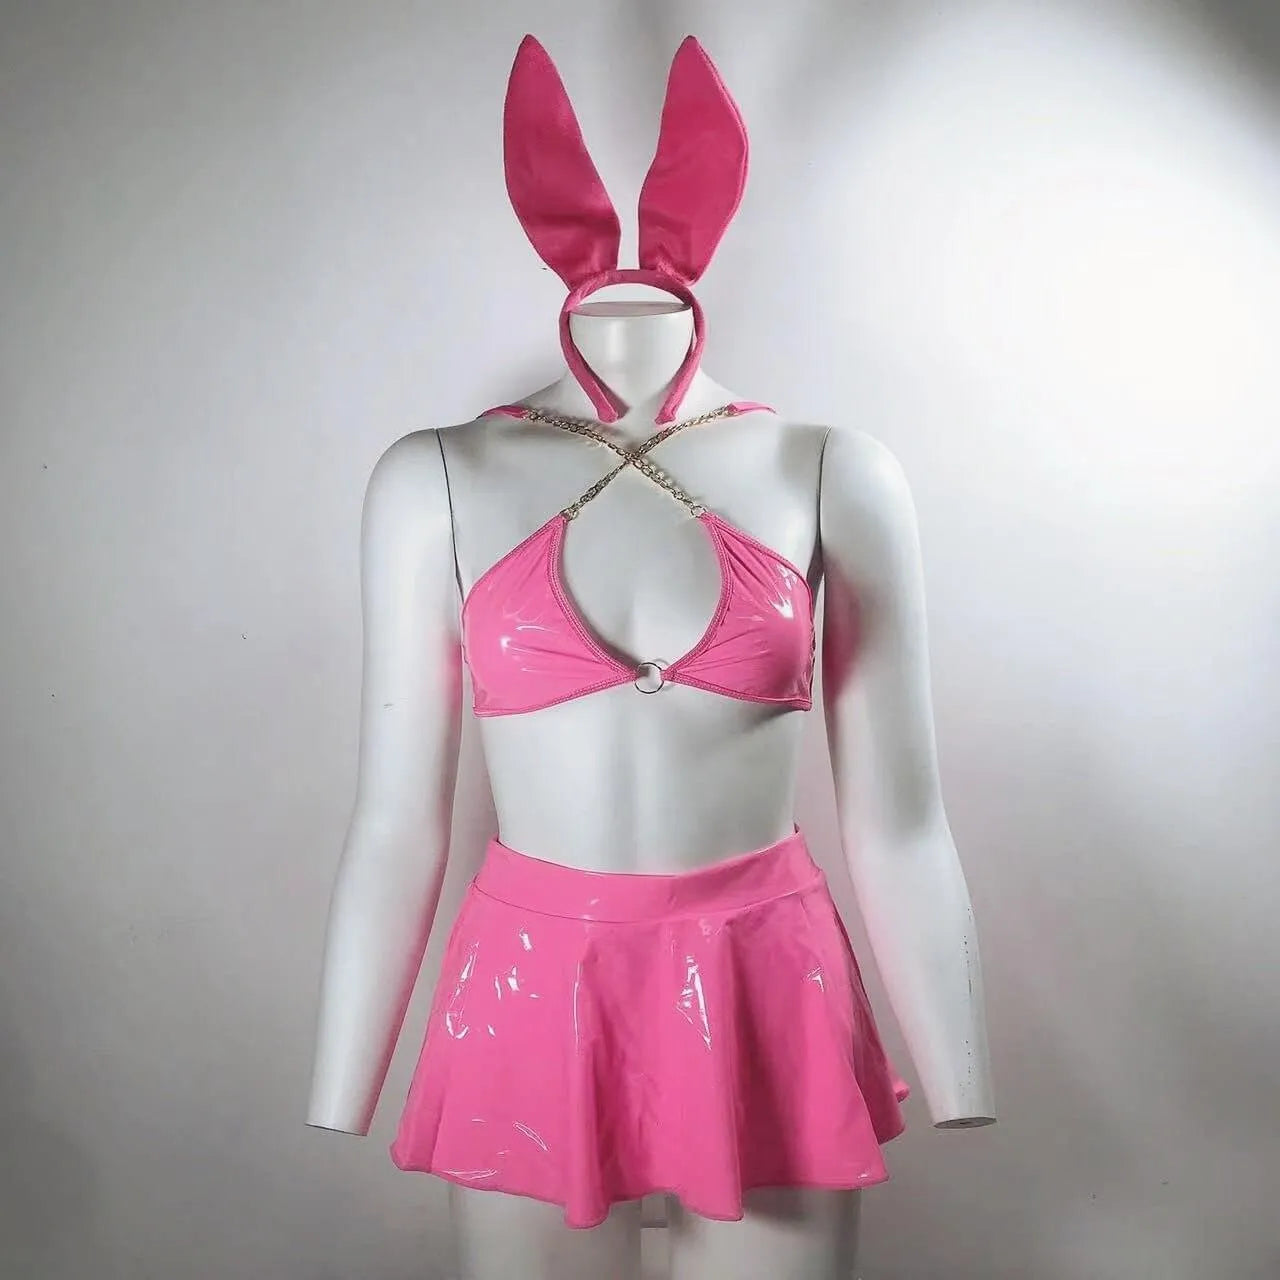 Three-piece bunny lingerie set crafted from luxurious faux leather